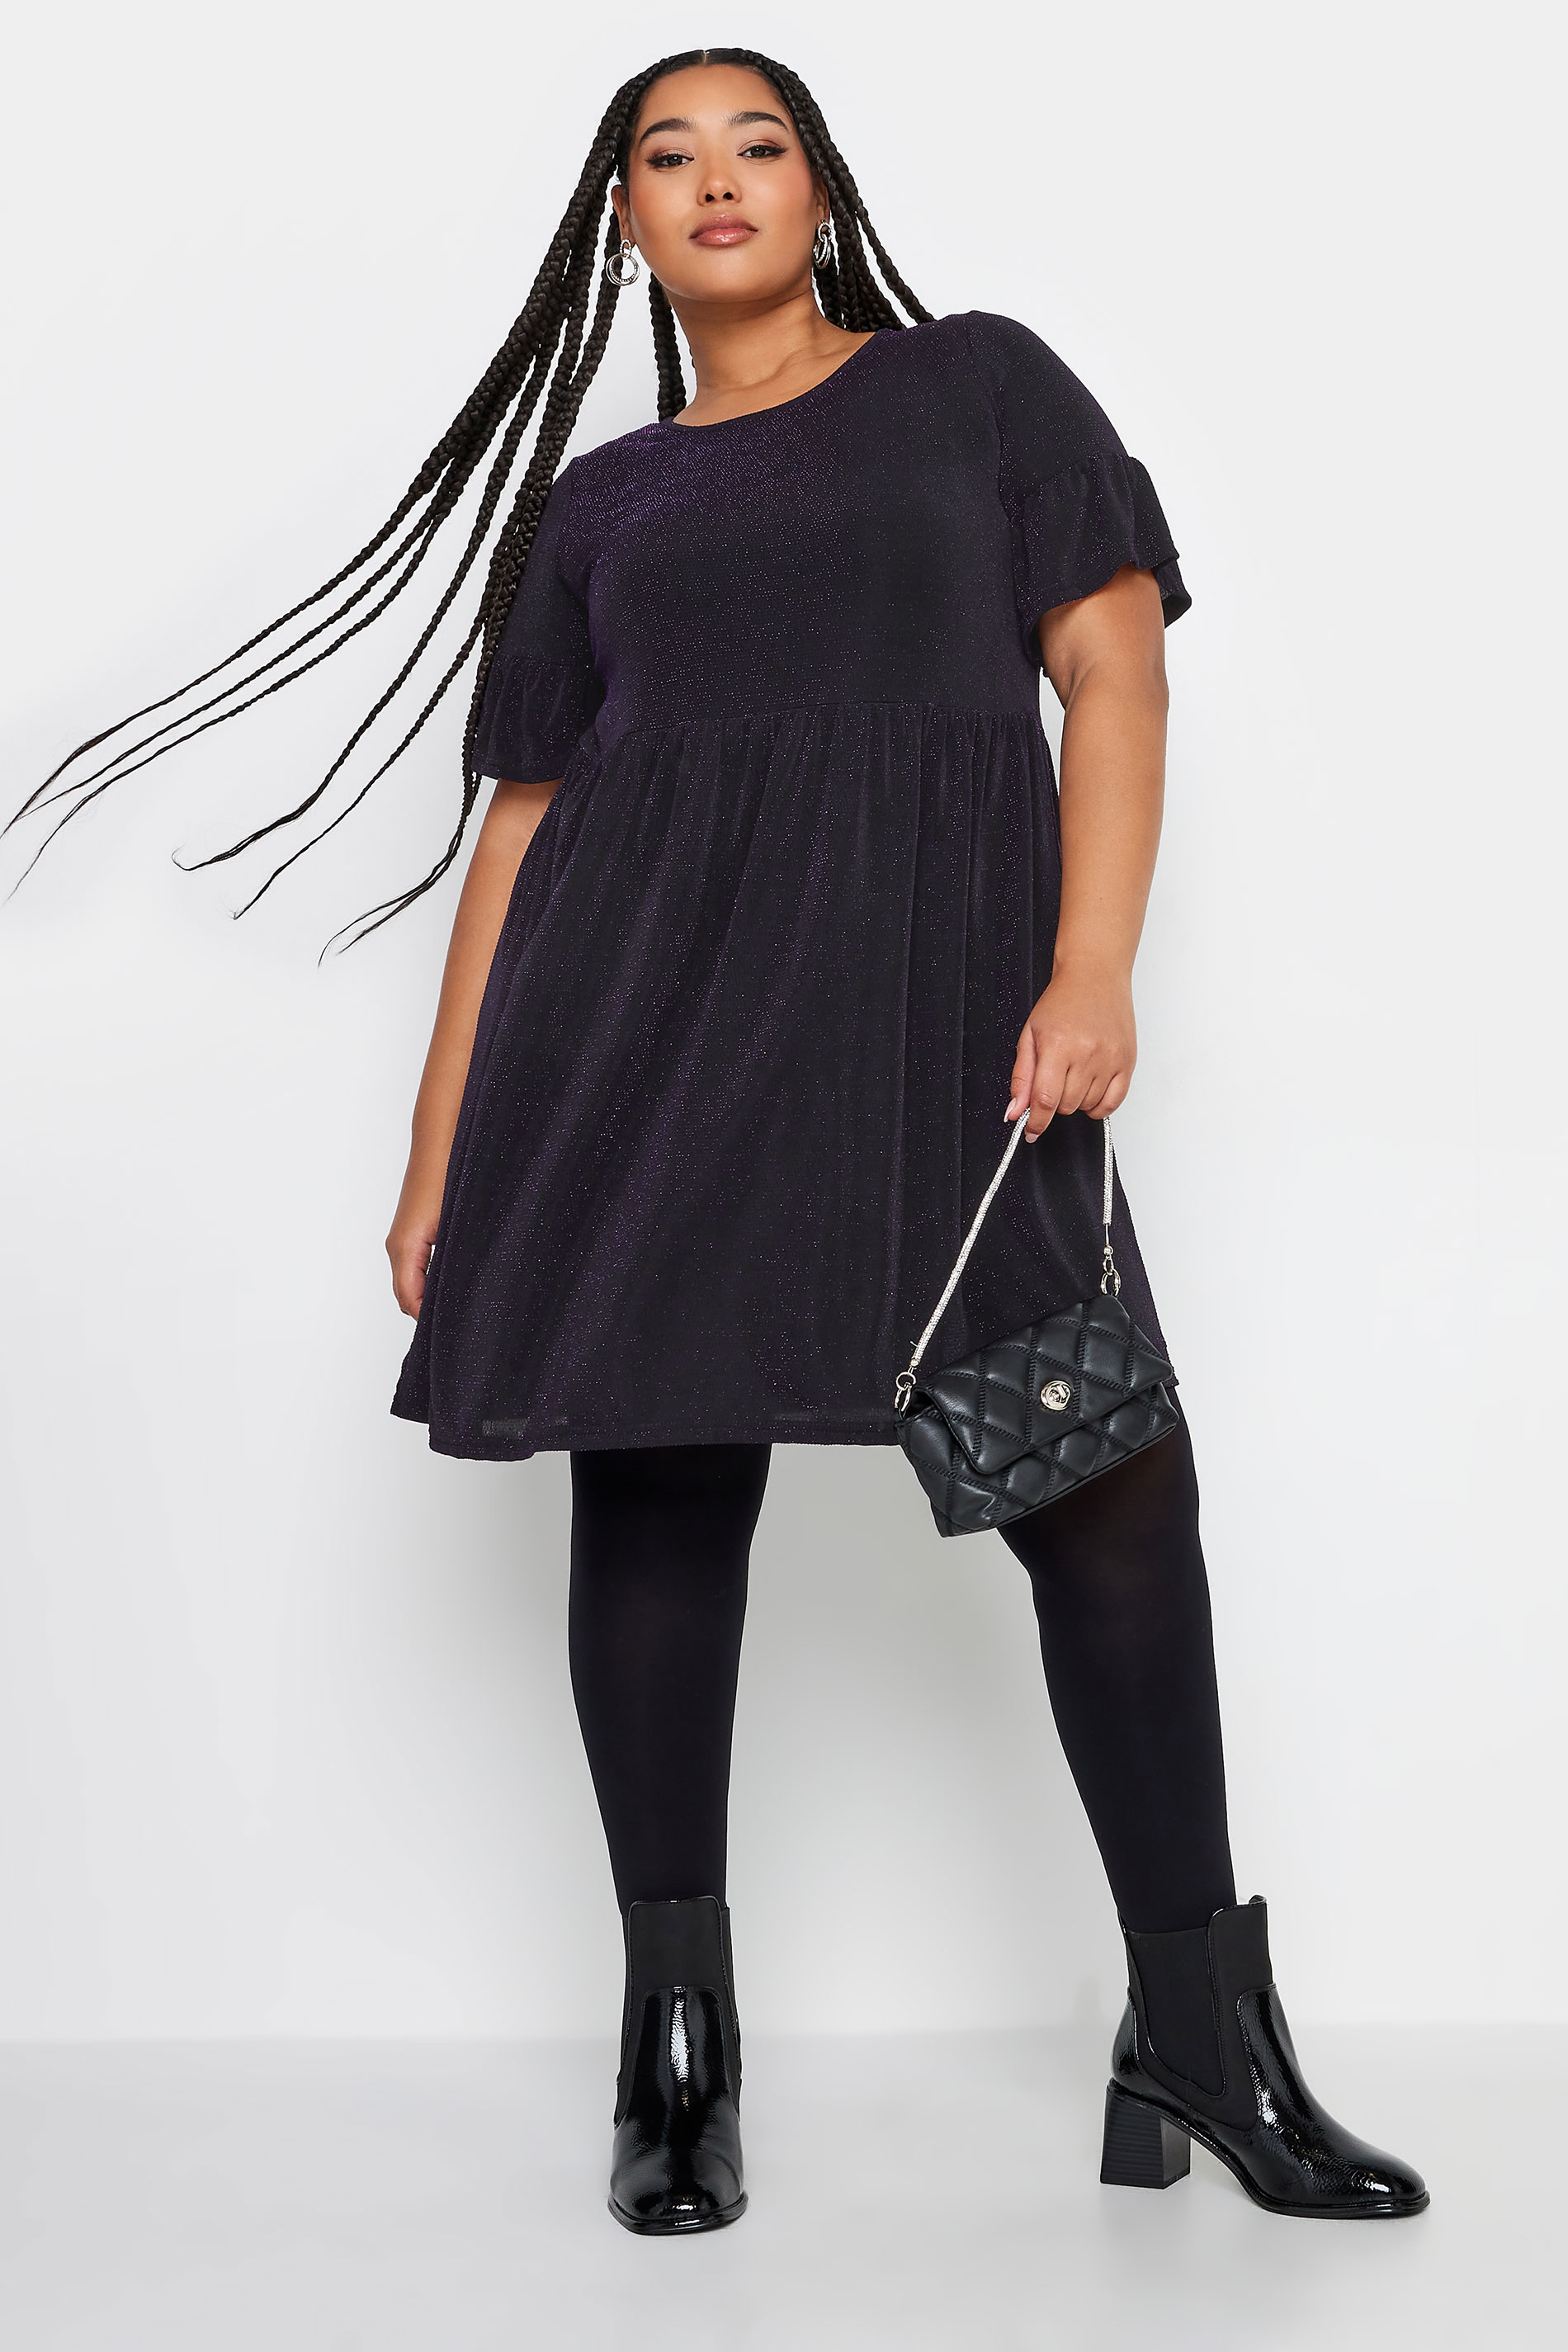 YOURS Curve Plus Size Black & Purple Glitter Frill Sleeve Tunic Dress | Yours Clothing  1